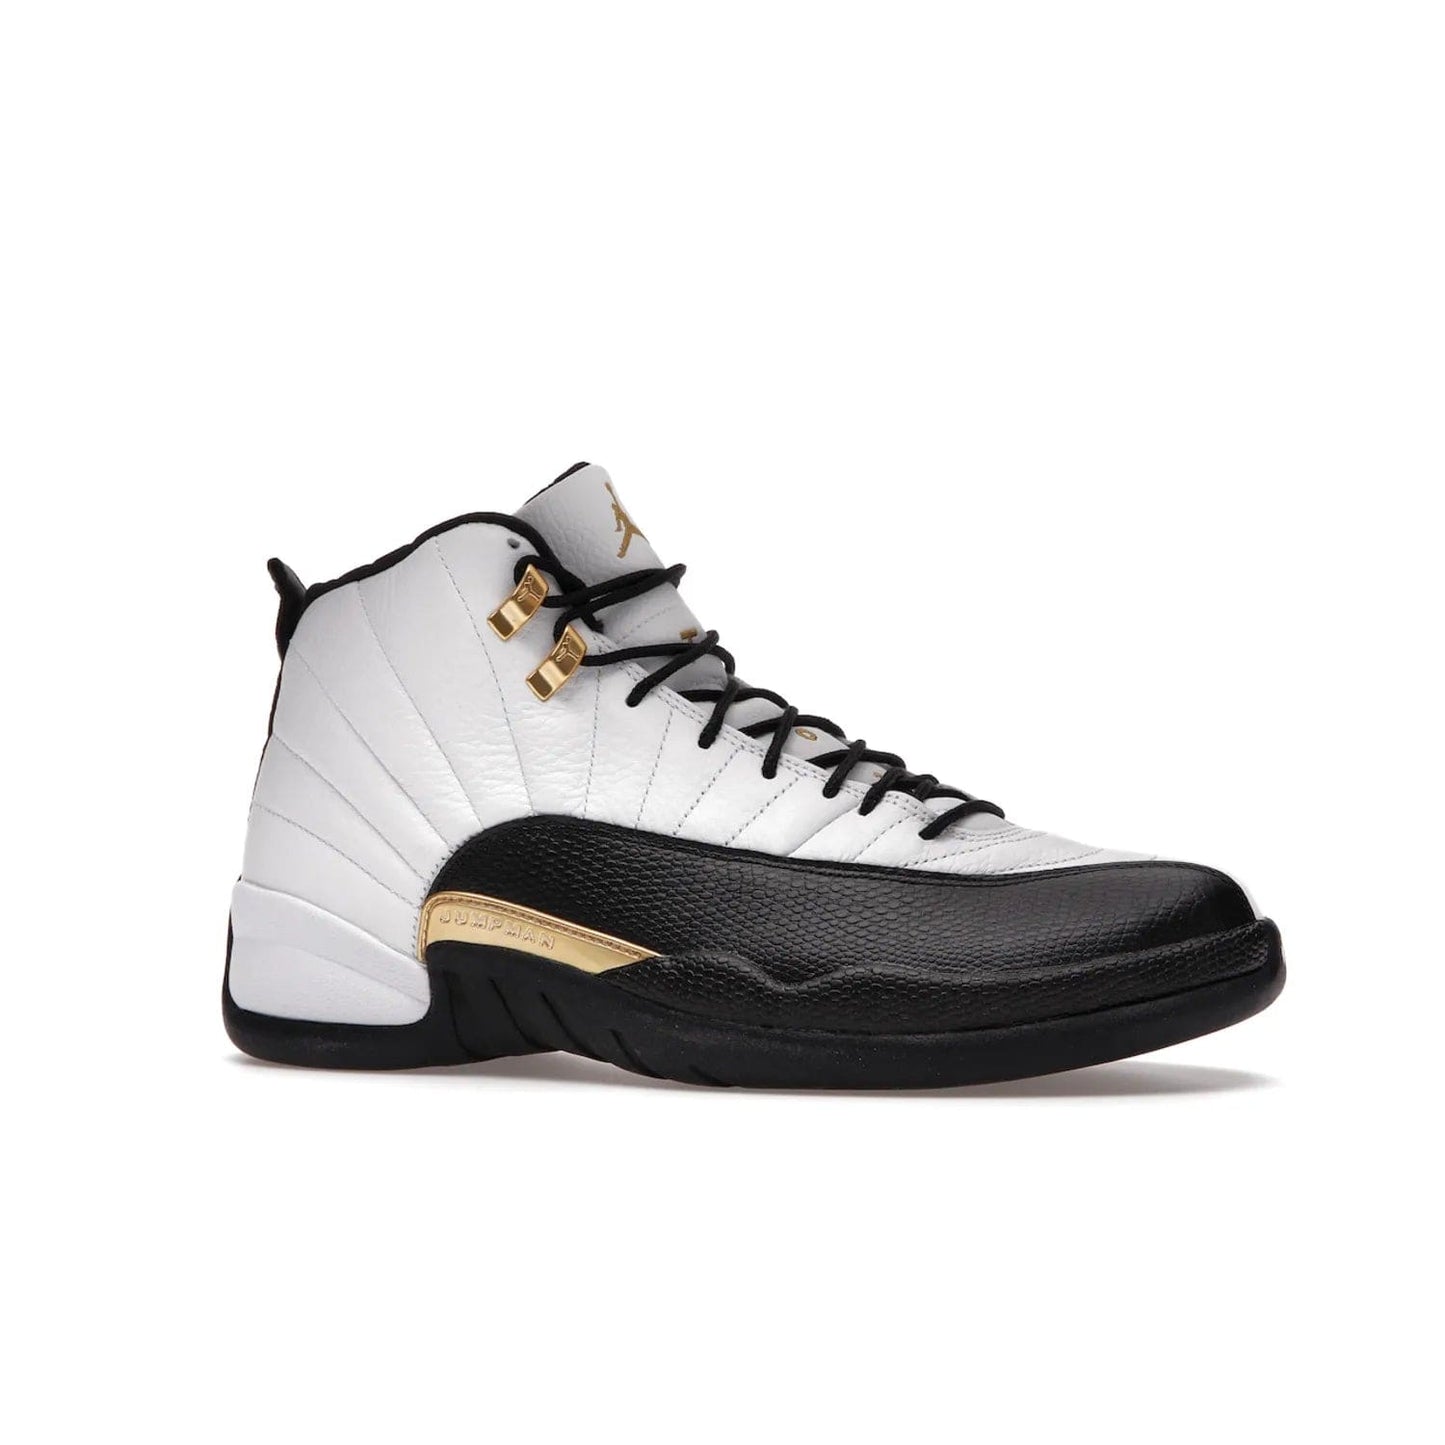 Jordan 12 Retro Royalty Taxi - Image 3 - Only at www.BallersClubKickz.com - Make a statement with the Air Jordan 12 Retro Royalty Taxi. Woven heel tag, gold plaquet, white tumbled leather upper plus a black toe wrap, make this modern take on the classic a must-have. Available in November 2021.